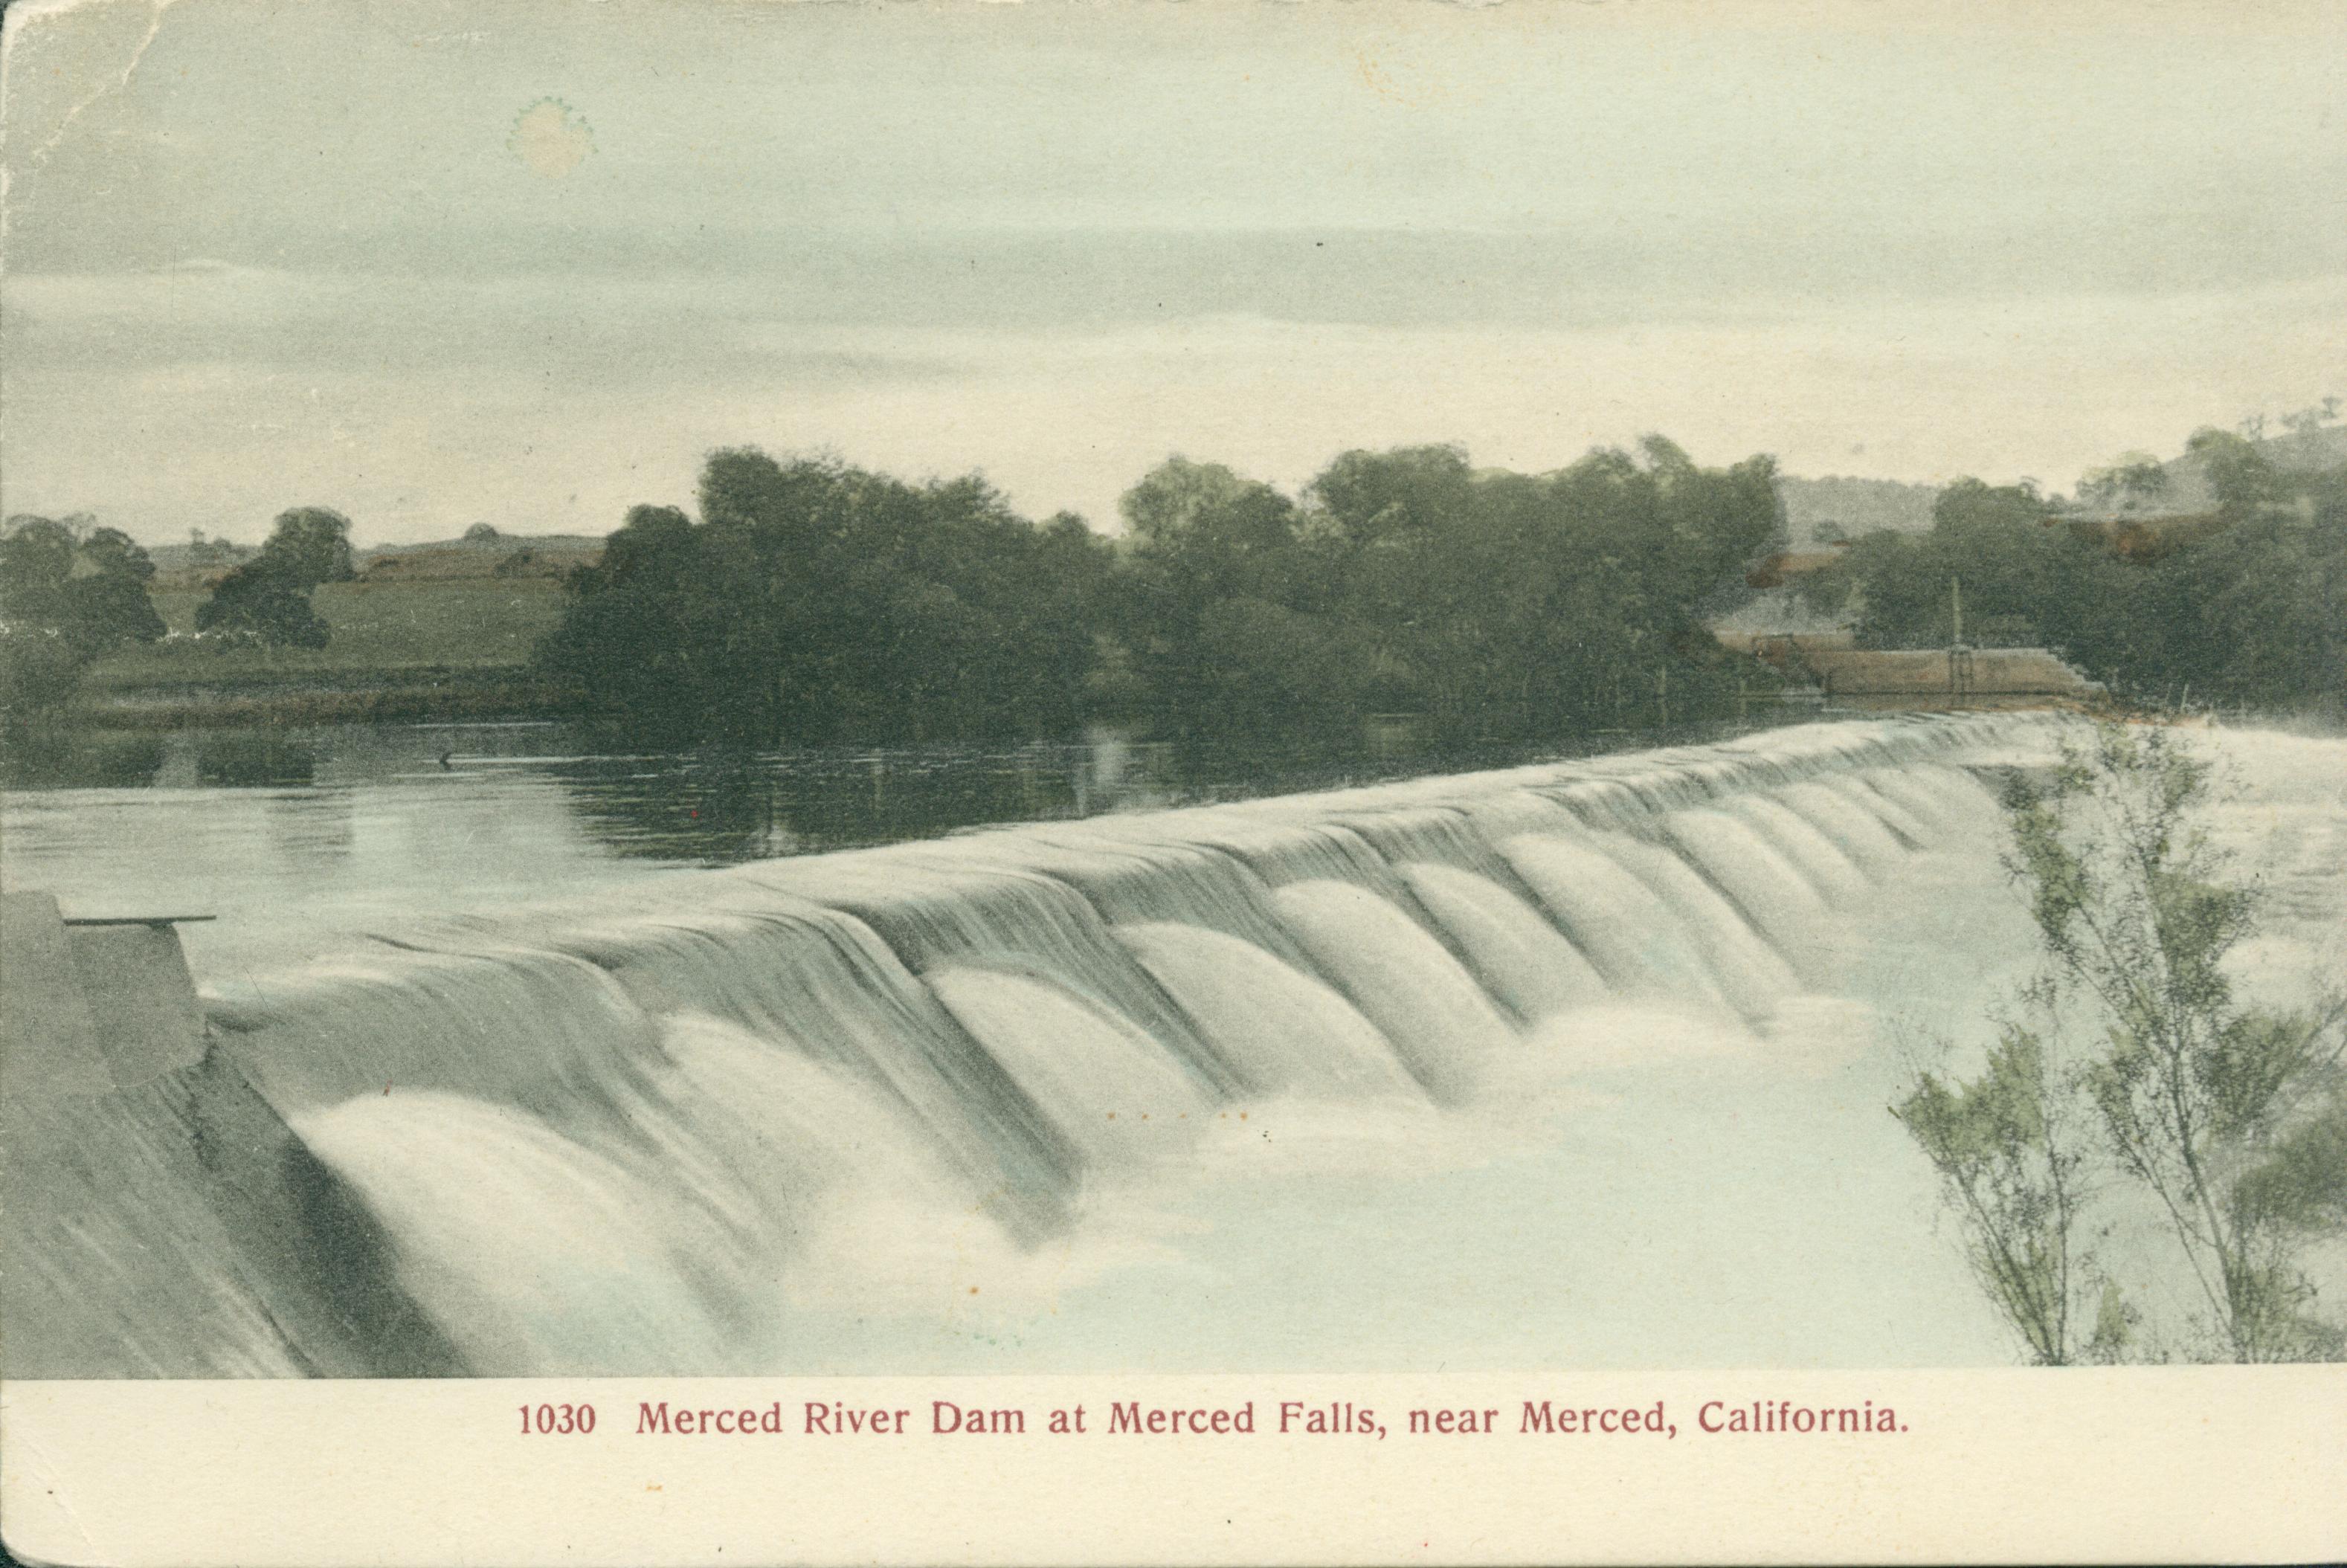 This postcard shows water spilling over a dam.